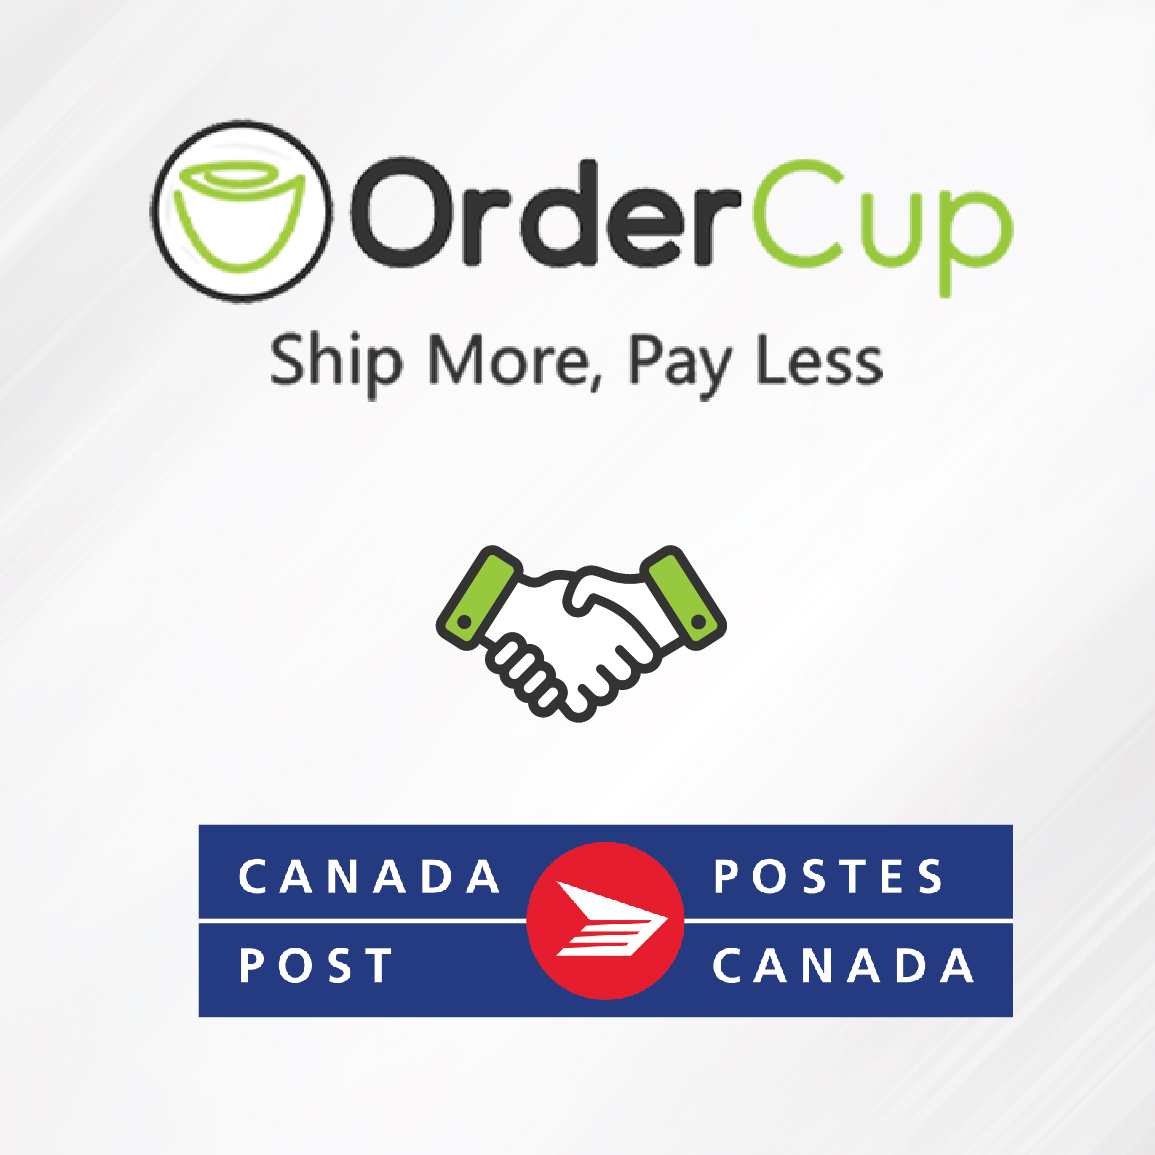 OrderCup partners with Canada Post